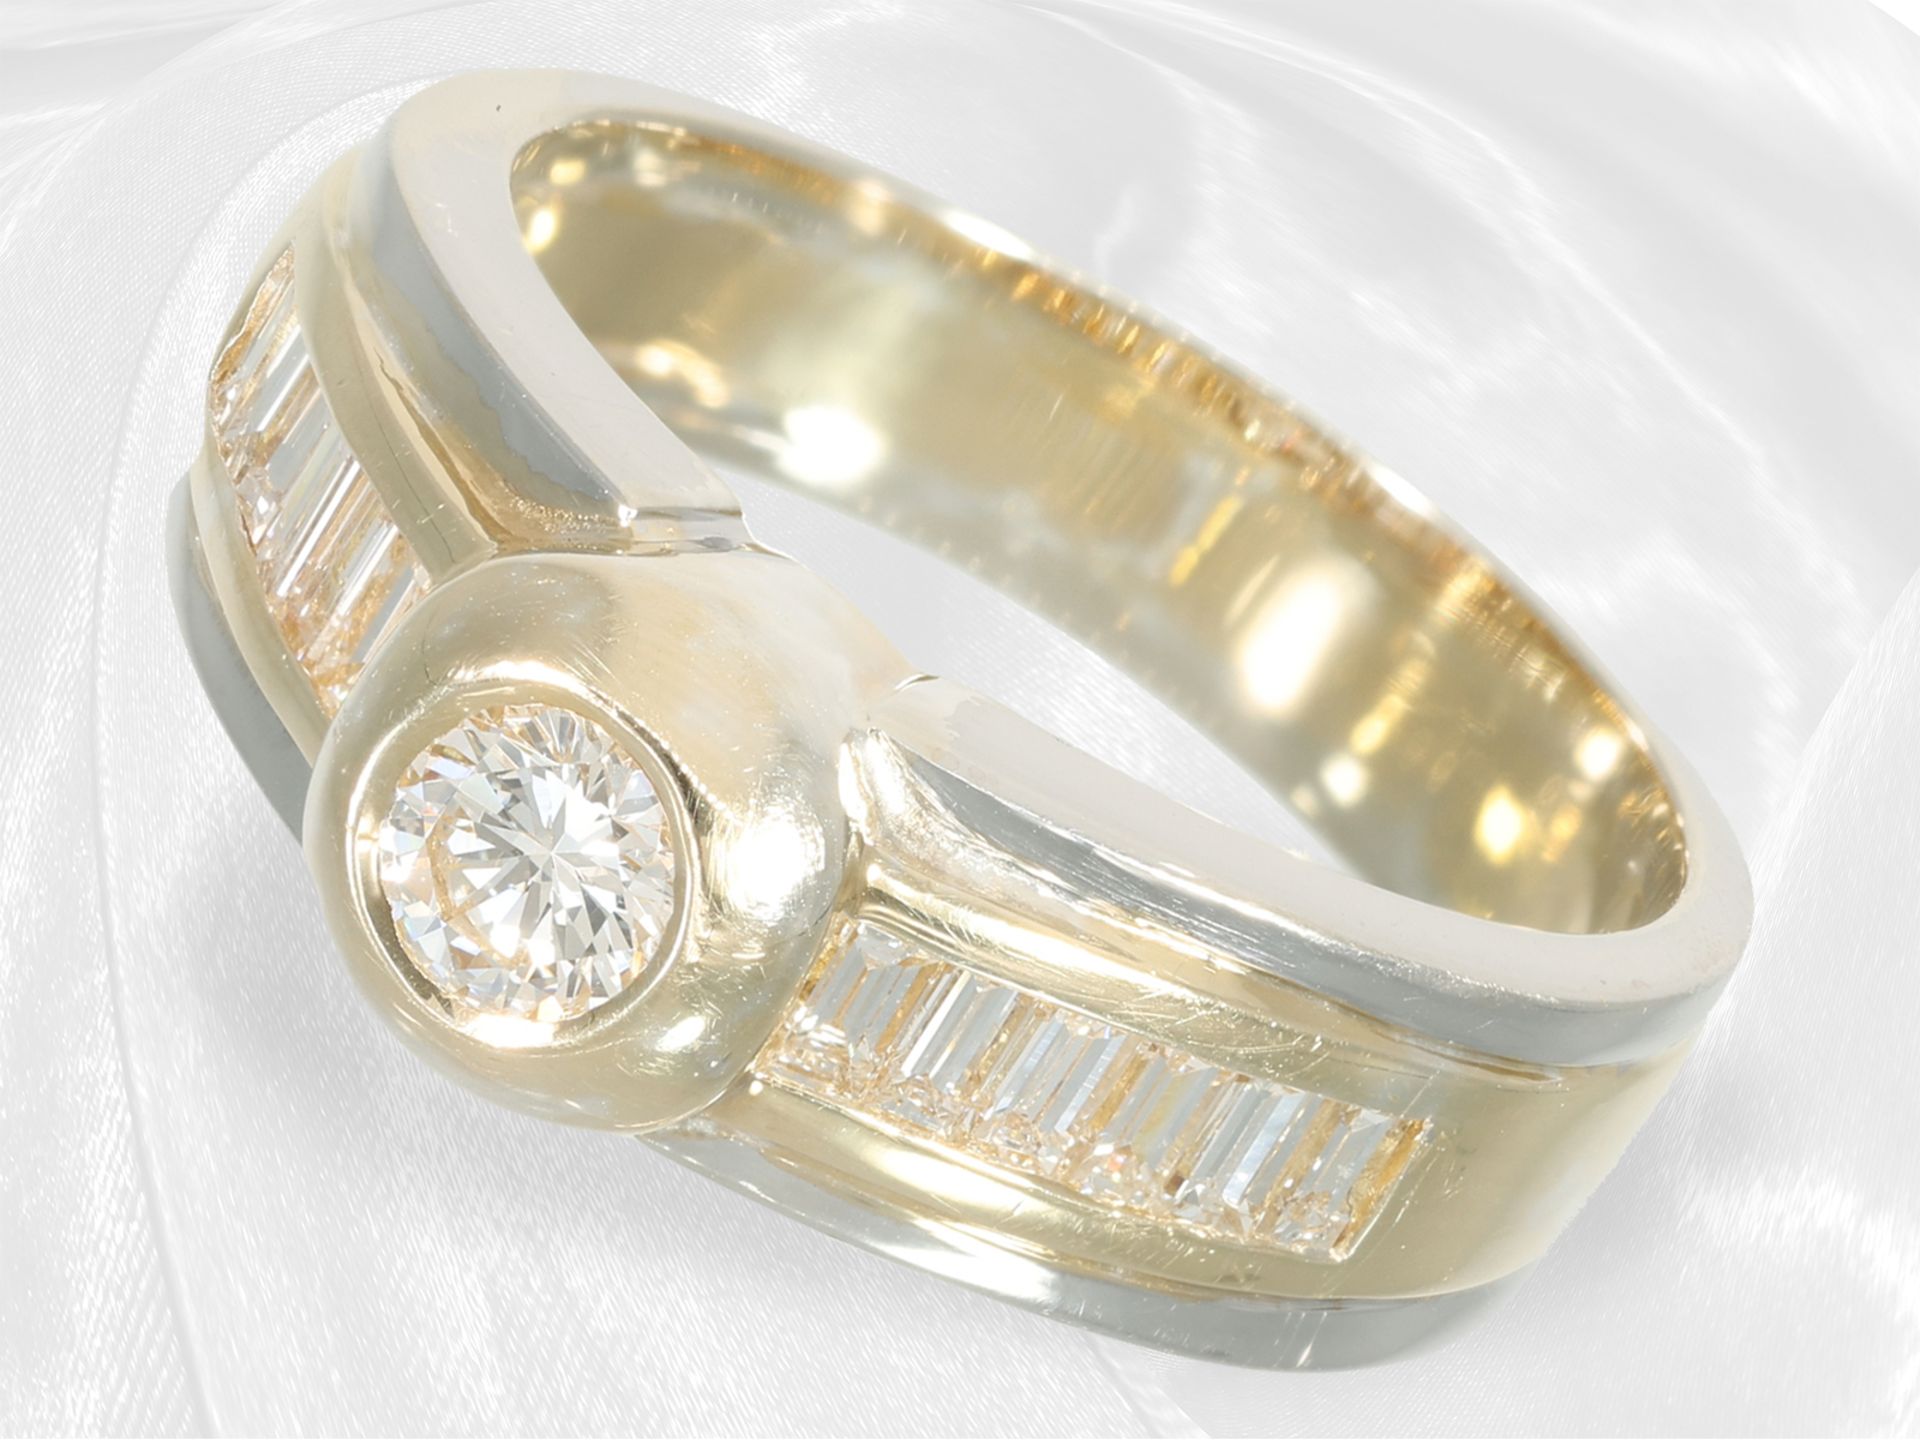 Solidly crafted designer goldsmith's ring with brilliant-cut diamonds, approx. 0.9ct, 18K gold, bico - Image 2 of 6